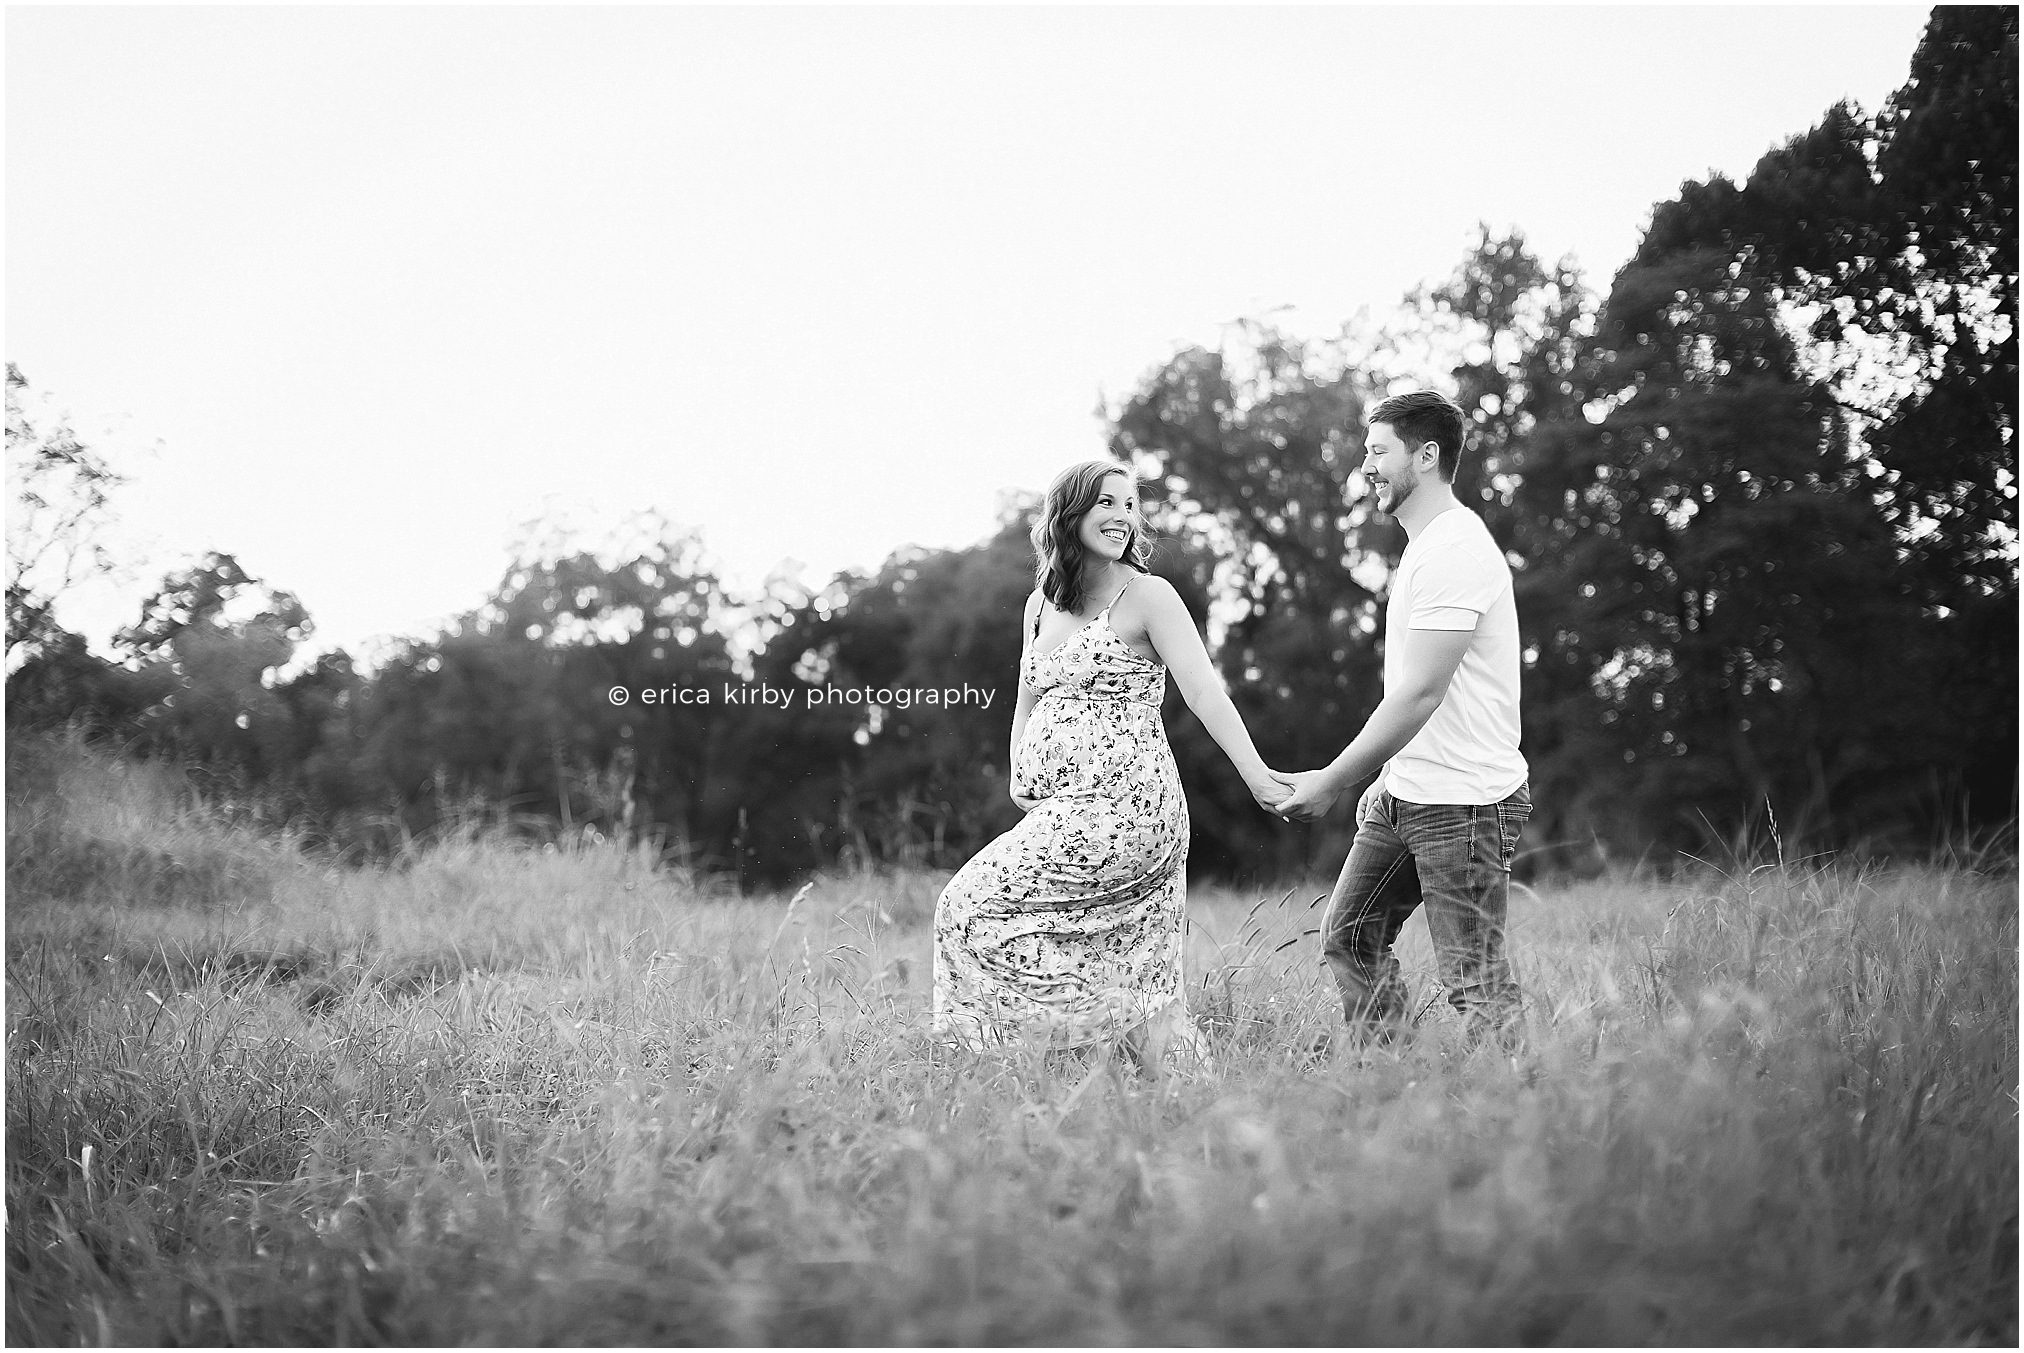 Northwest AR Maternity Photography - Bentonville Rogers Fayetteville Arkansas pregnancy photographer - maternity photo session in grassy field at sunset in NWA - Erica Kirby Photography